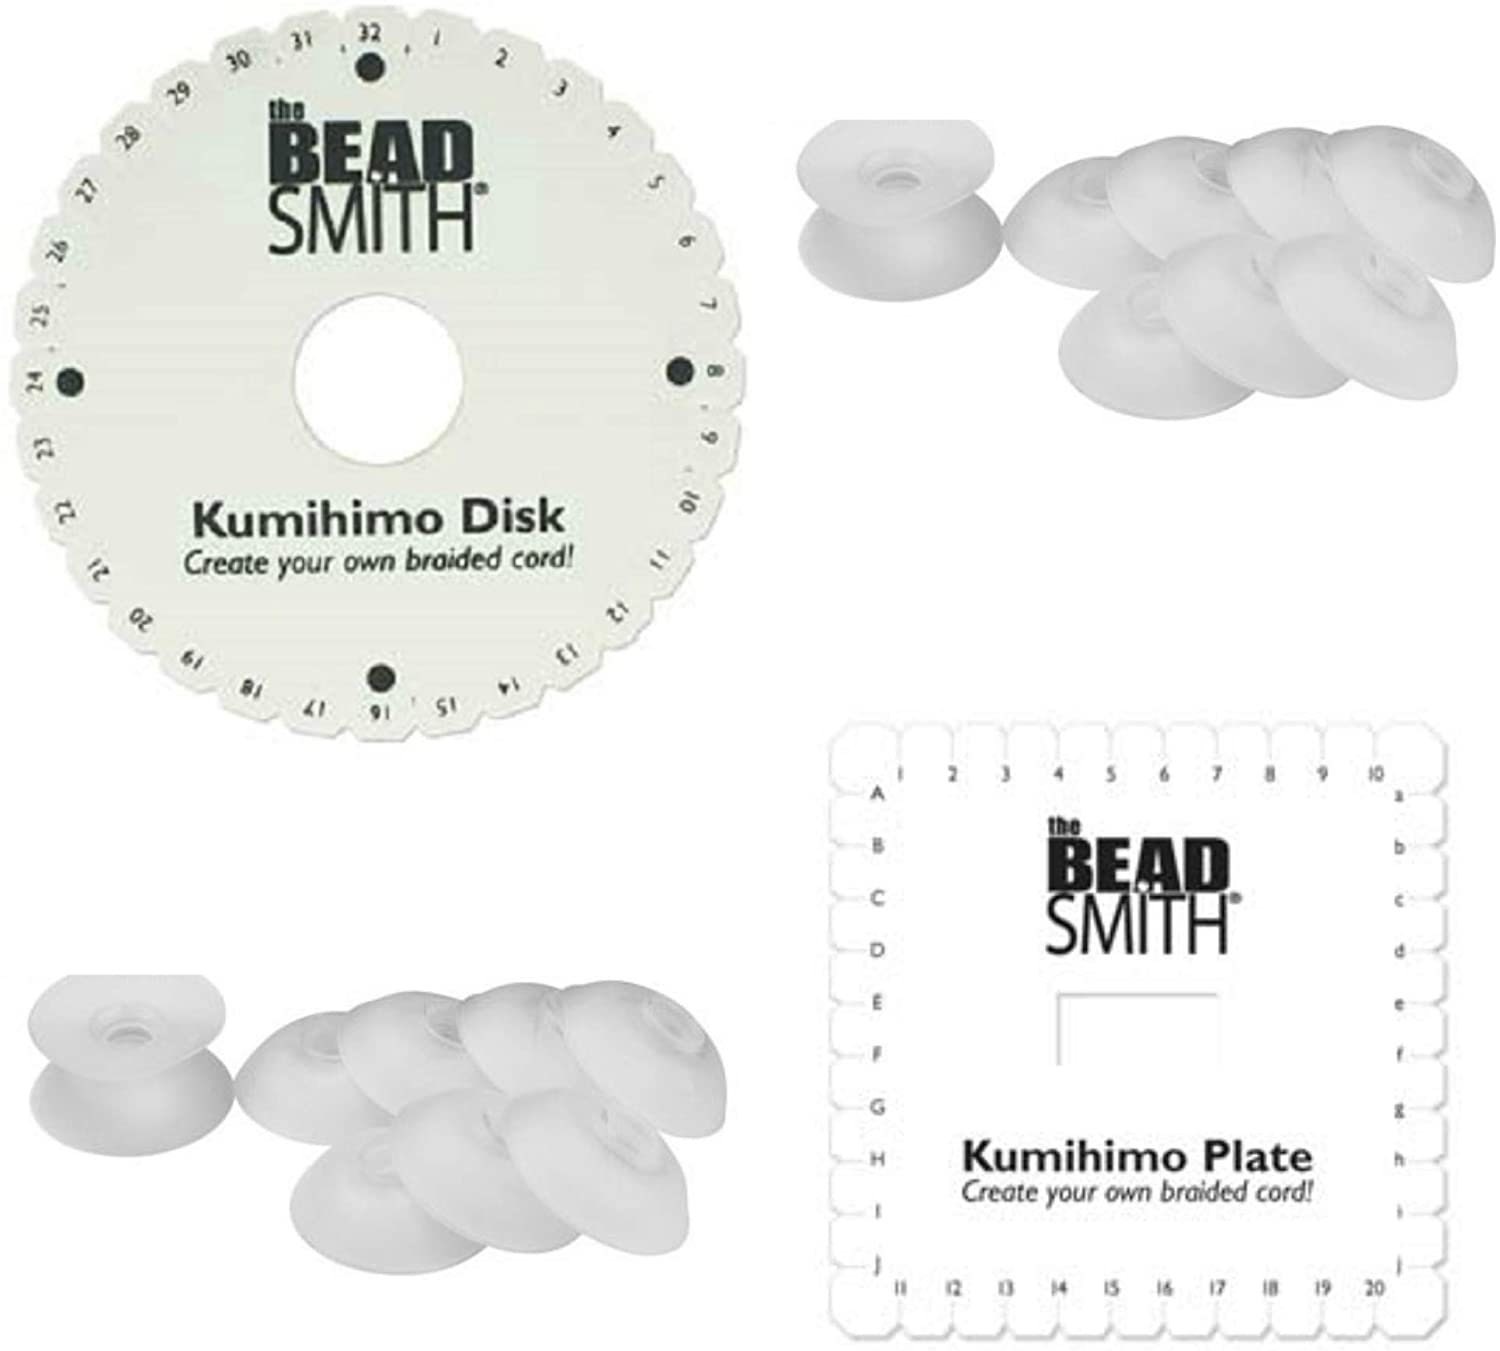 The Beadsmith Double Density 32 Slot Kumihimo Disk, For Japanese Braiding  and Cording 6 Inches, White 